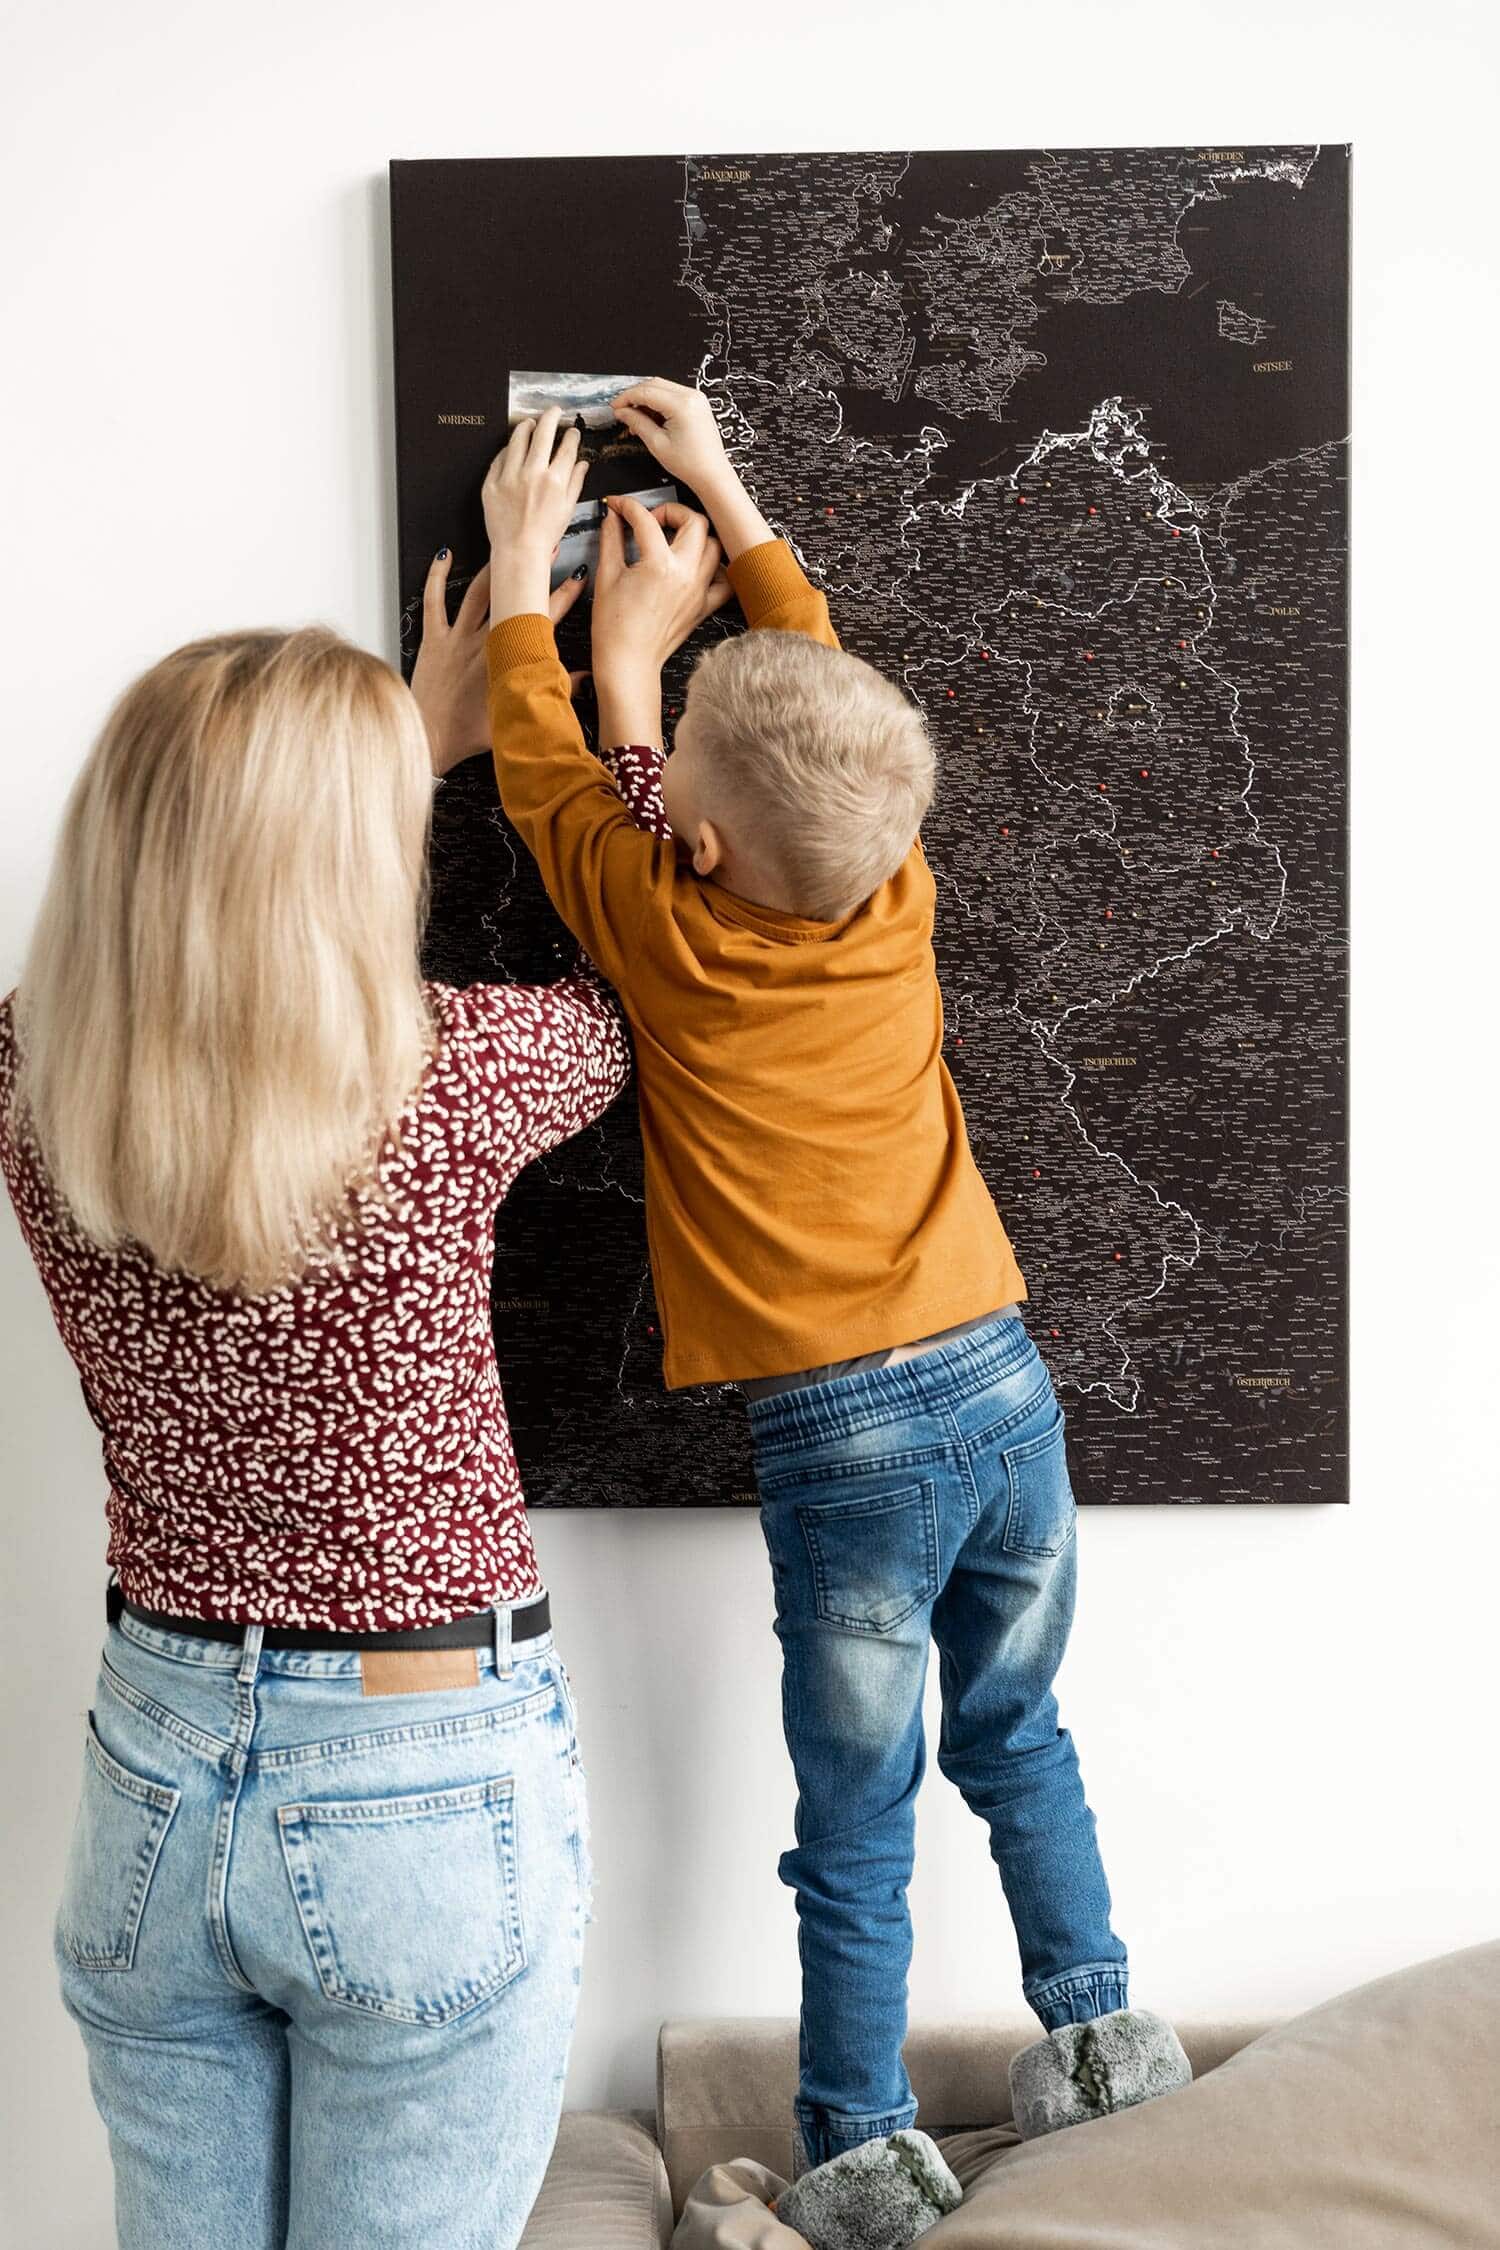 black map of germany on canvas